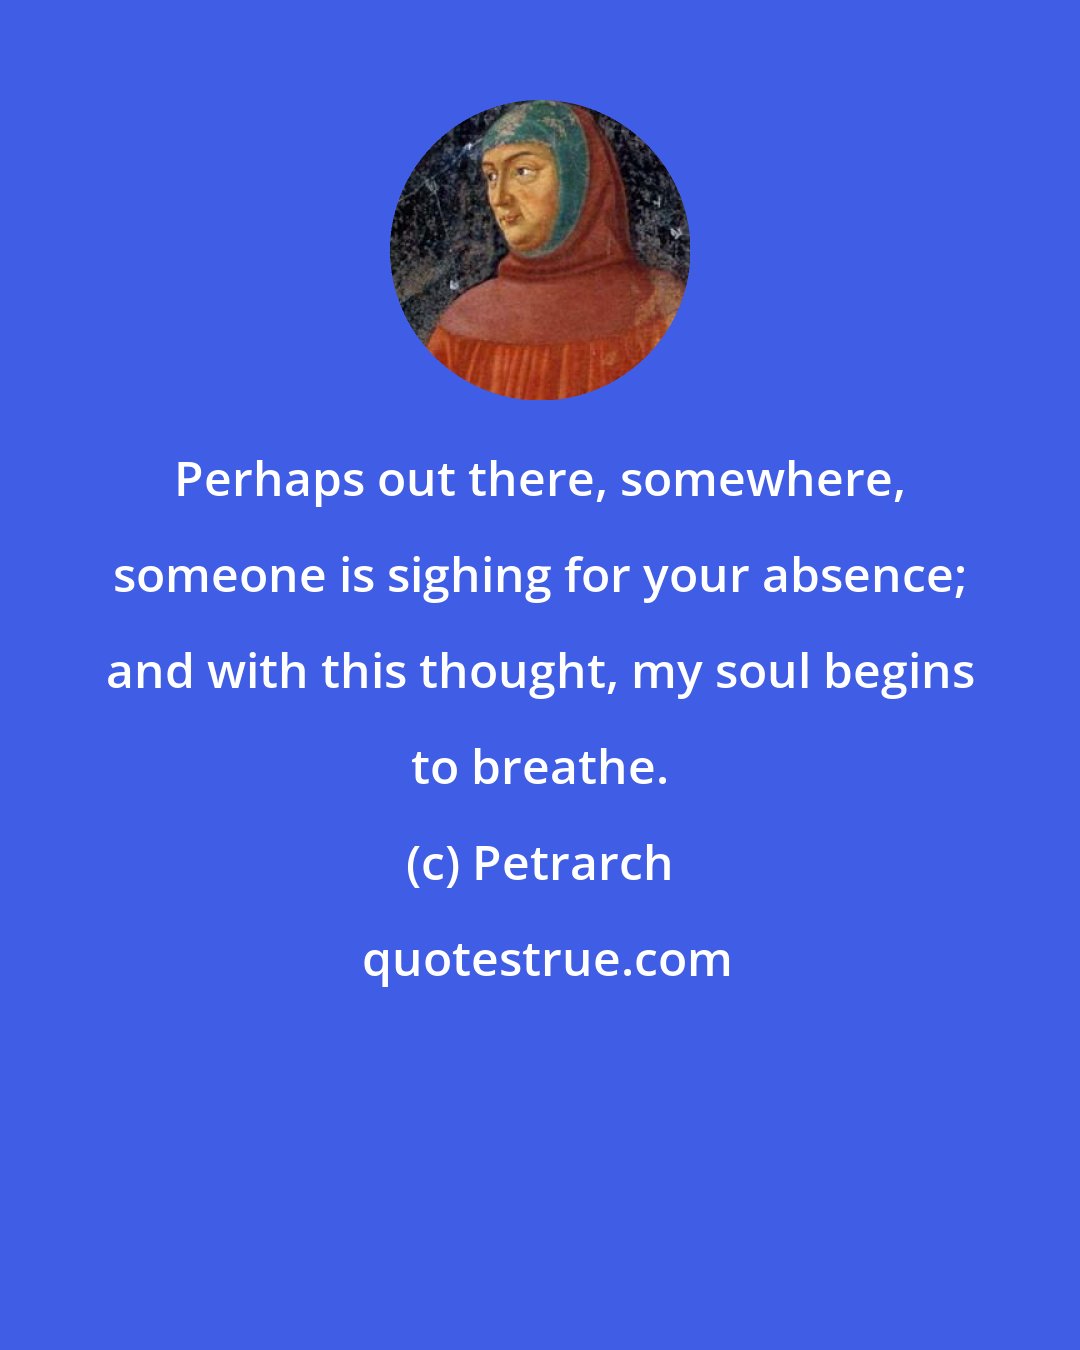 Petrarch: Perhaps out there, somewhere, someone is sighing for your absence; and with this thought, my soul begins to breathe.